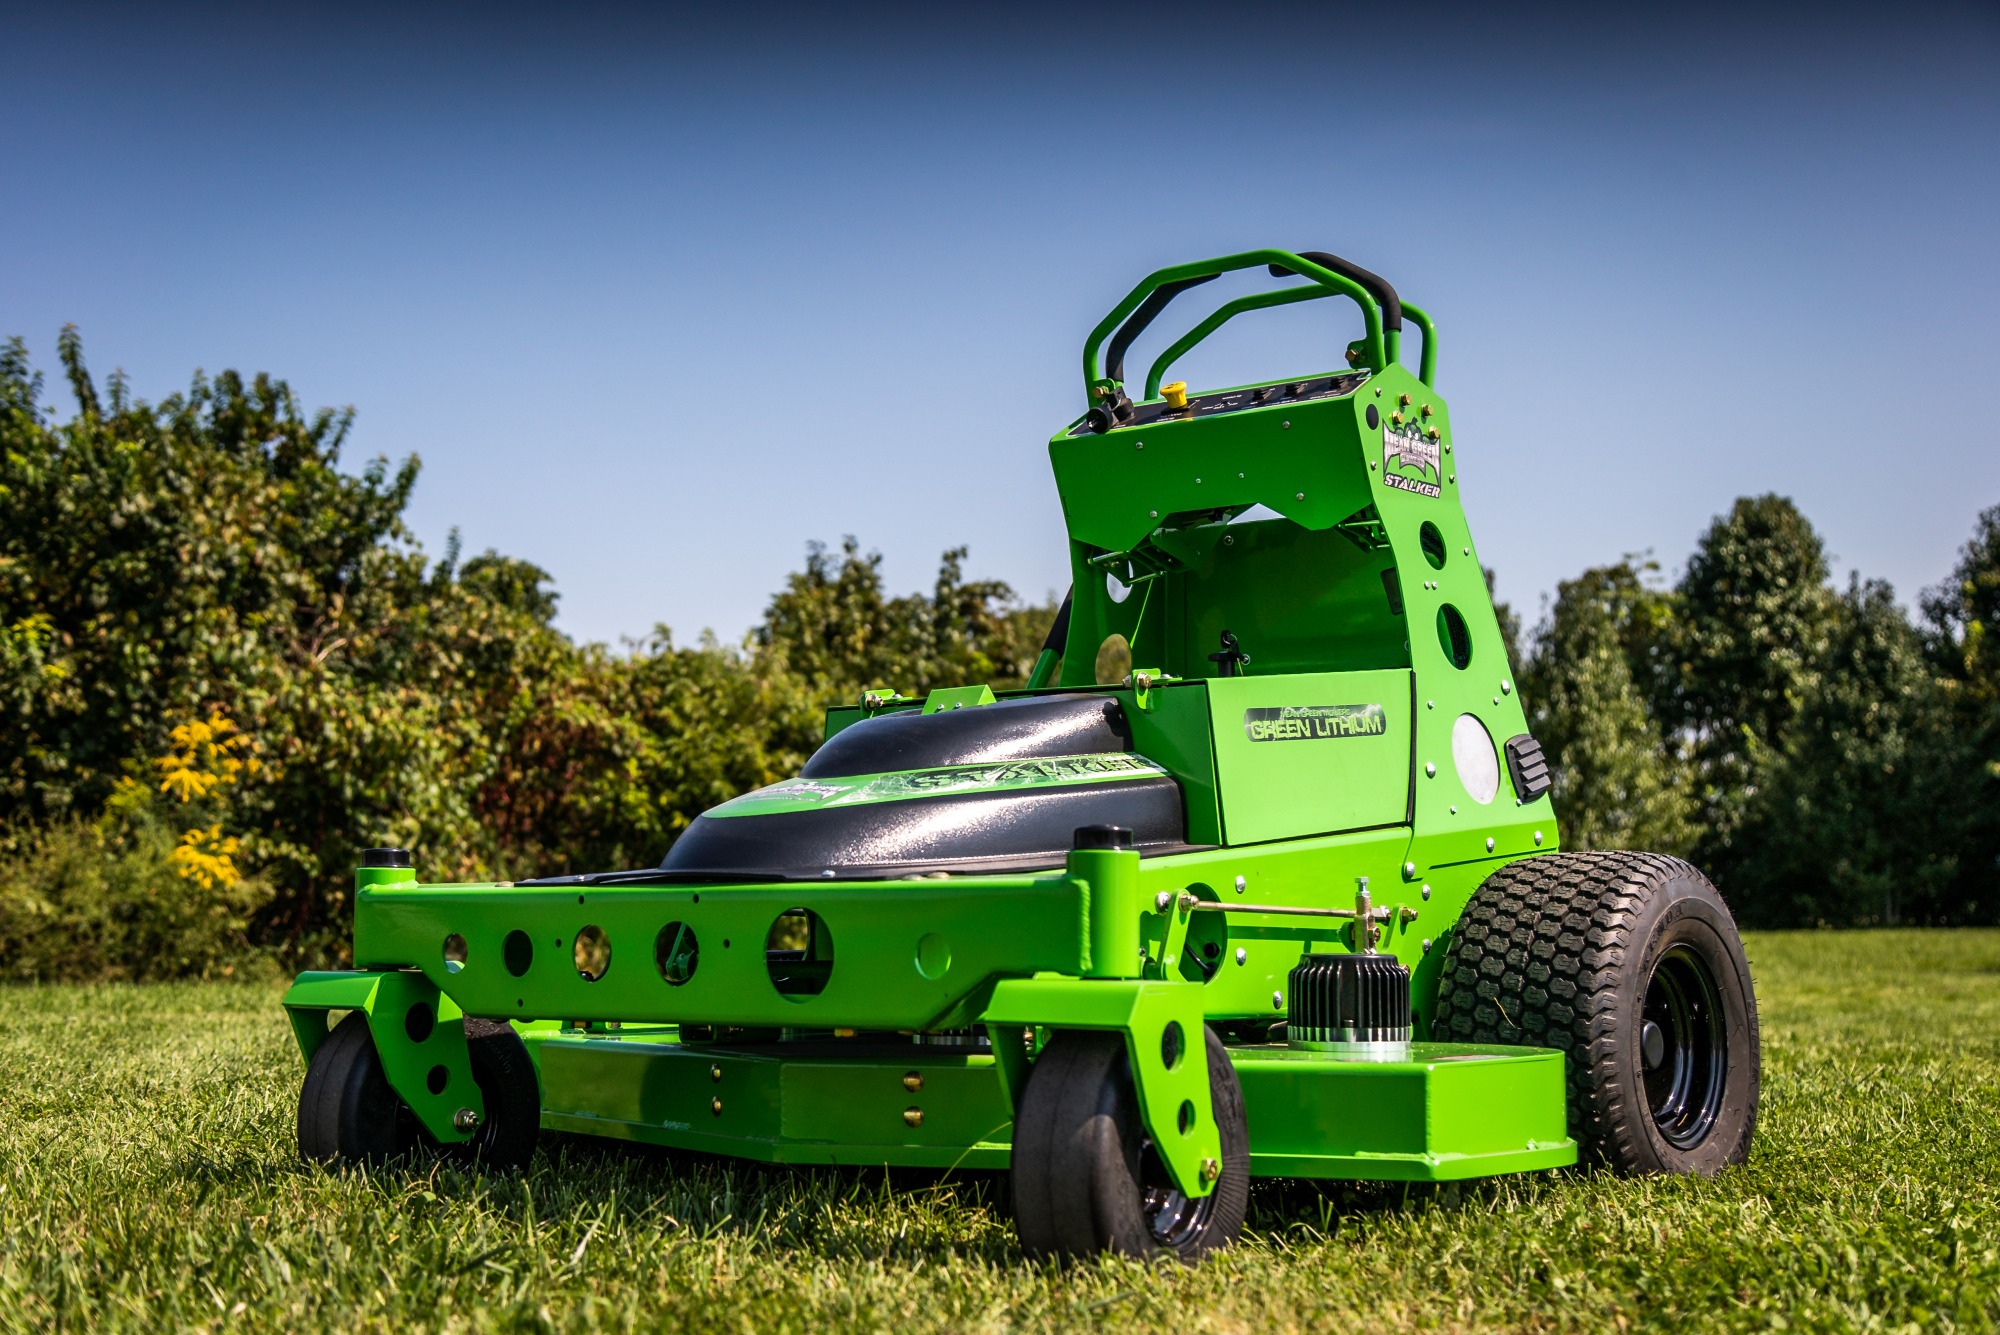 SK-48 Electric Stand On Mower